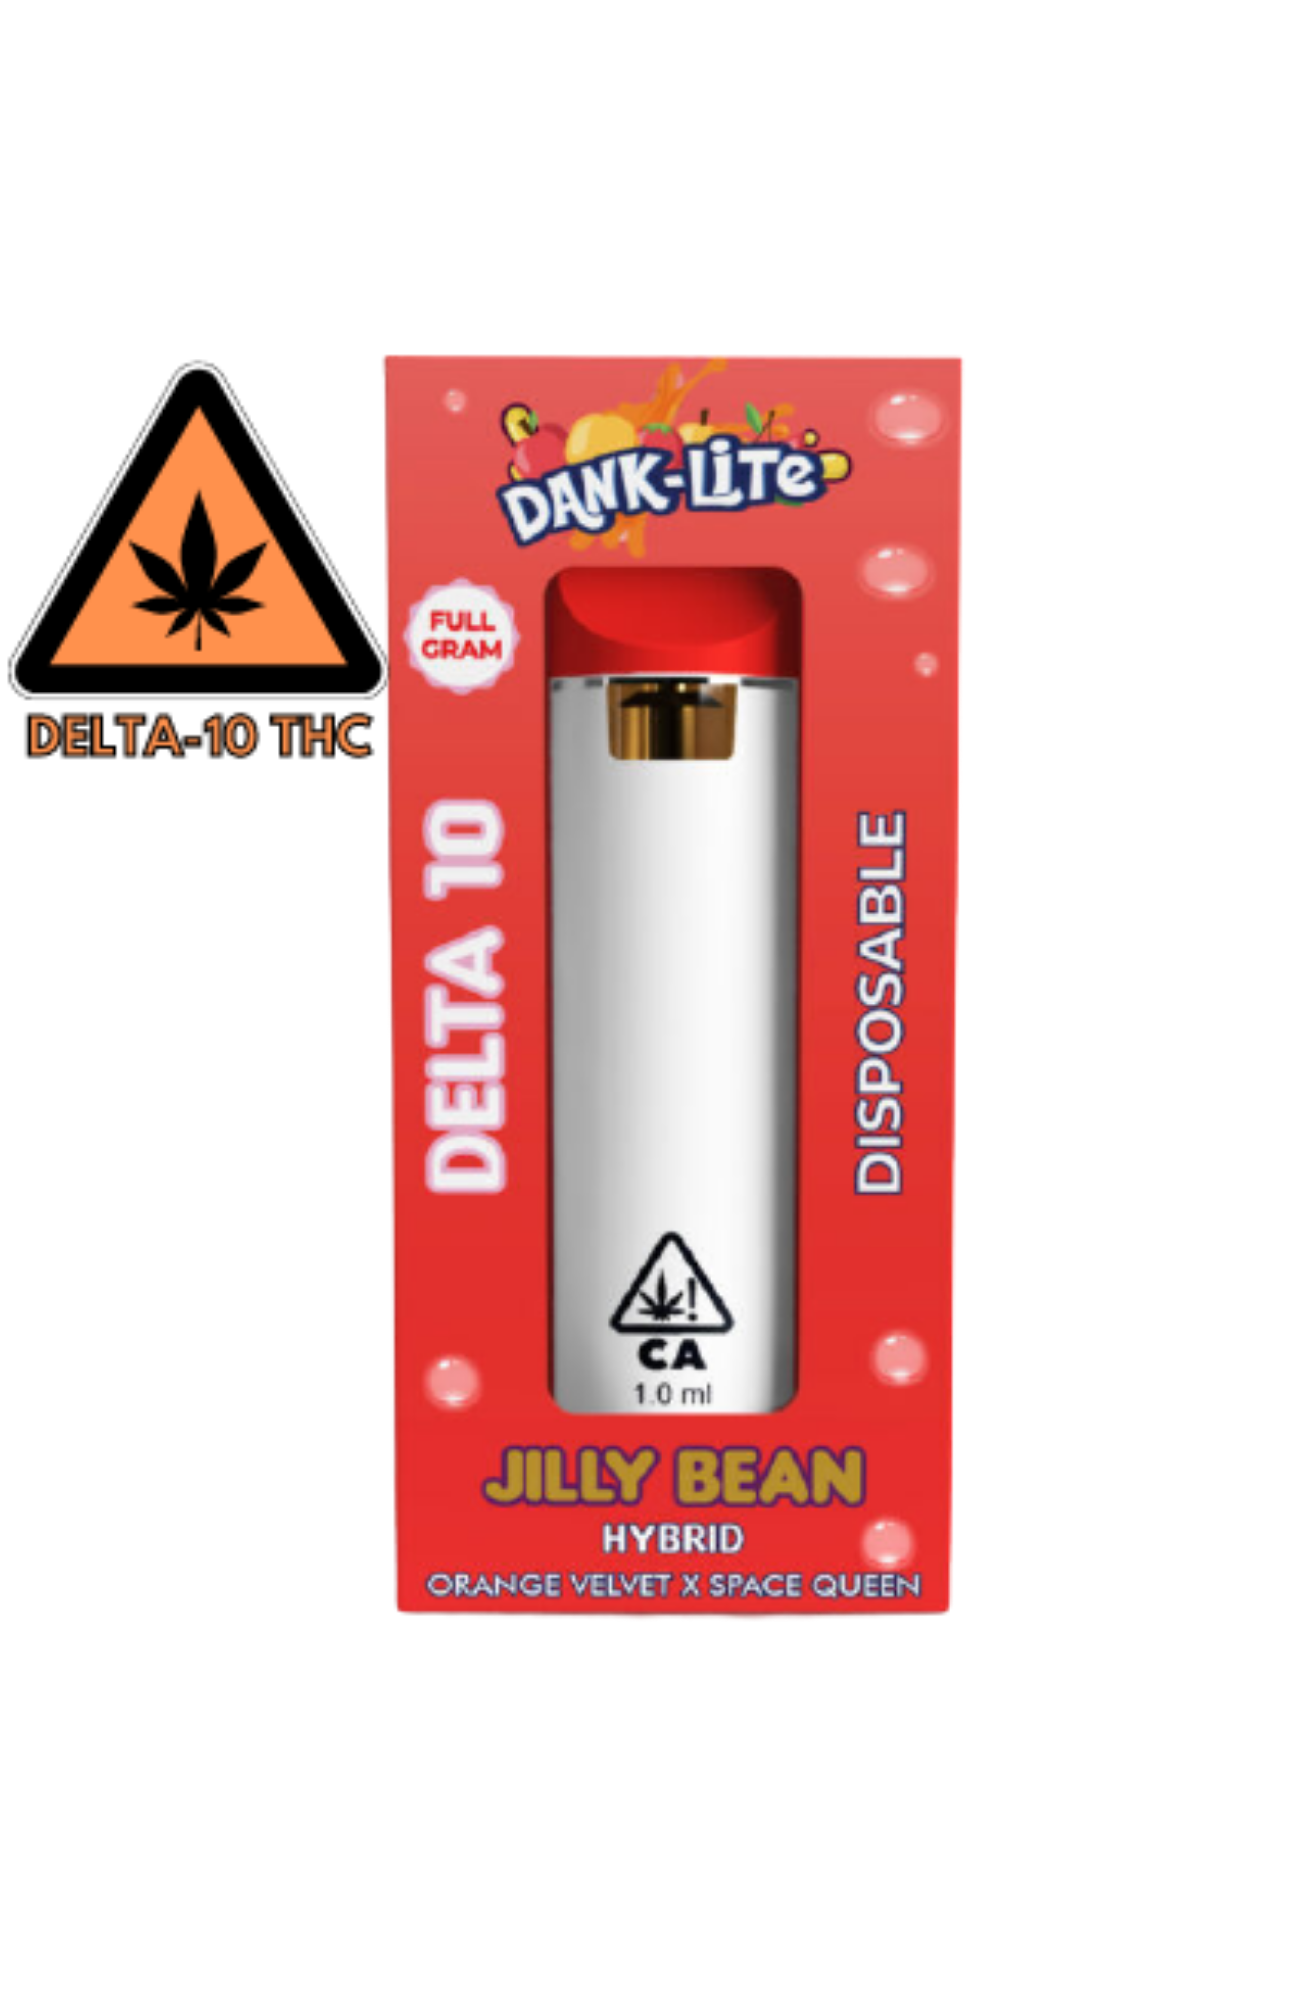 Delta-10 Thc Vape Cartridge - Thc|Delta|Products|Delta-10|Effects|Cbd|Cannabis|Cannabinoids|Cannabinoid|Hemp|Oil|Body|Benefits|Pain|Drug|Inflammation|People|Receptors|Gummies|Arthritis|Market|Product|Marijuana|Delta-8|Research|States|Cb1|Test|Strains|Effect|Vape|Experience|Users|Time|Compound|System|Way|Anxiety|Plants|Chemical|Delta-10 Thc|Delta-9 Thc|Cbd Oil|Drug Test|Delta-10 Products|Side Effects|Delta-8 Thc|Cb1 Receptors|Cb2 Receptors|Cannabis Plants|Endocannabinoid System|Minor Discomfort|Medical Marijuana|Thc Products|Psychoactive Effects|Arthritic Symptoms|New Cannabinoid|Fusion Farms|Arthritic Patients|Conclusion Delta|Medical Cannabis Oil|Arthritis Pain|Good Fit|Double Bond|Anticonvulsant Actions|Medical Benefit|Anticonvulsant Properties|Epileptic Children|User Guide|Farm Bill